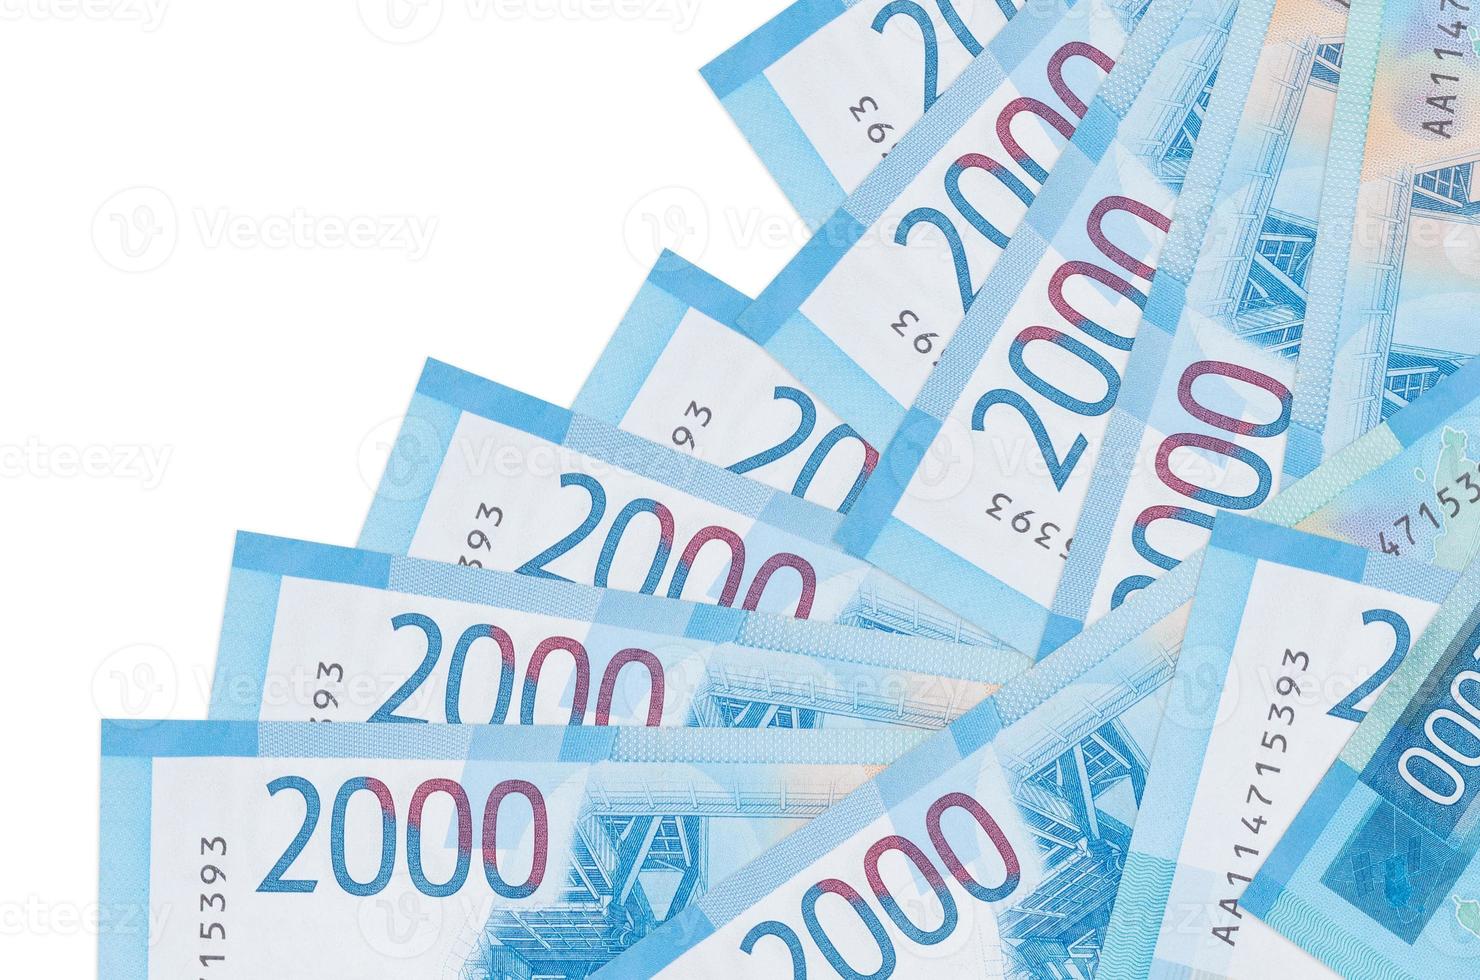 2000 russian rubles bills lies in different order isolated on white. Local banking or money making concept photo